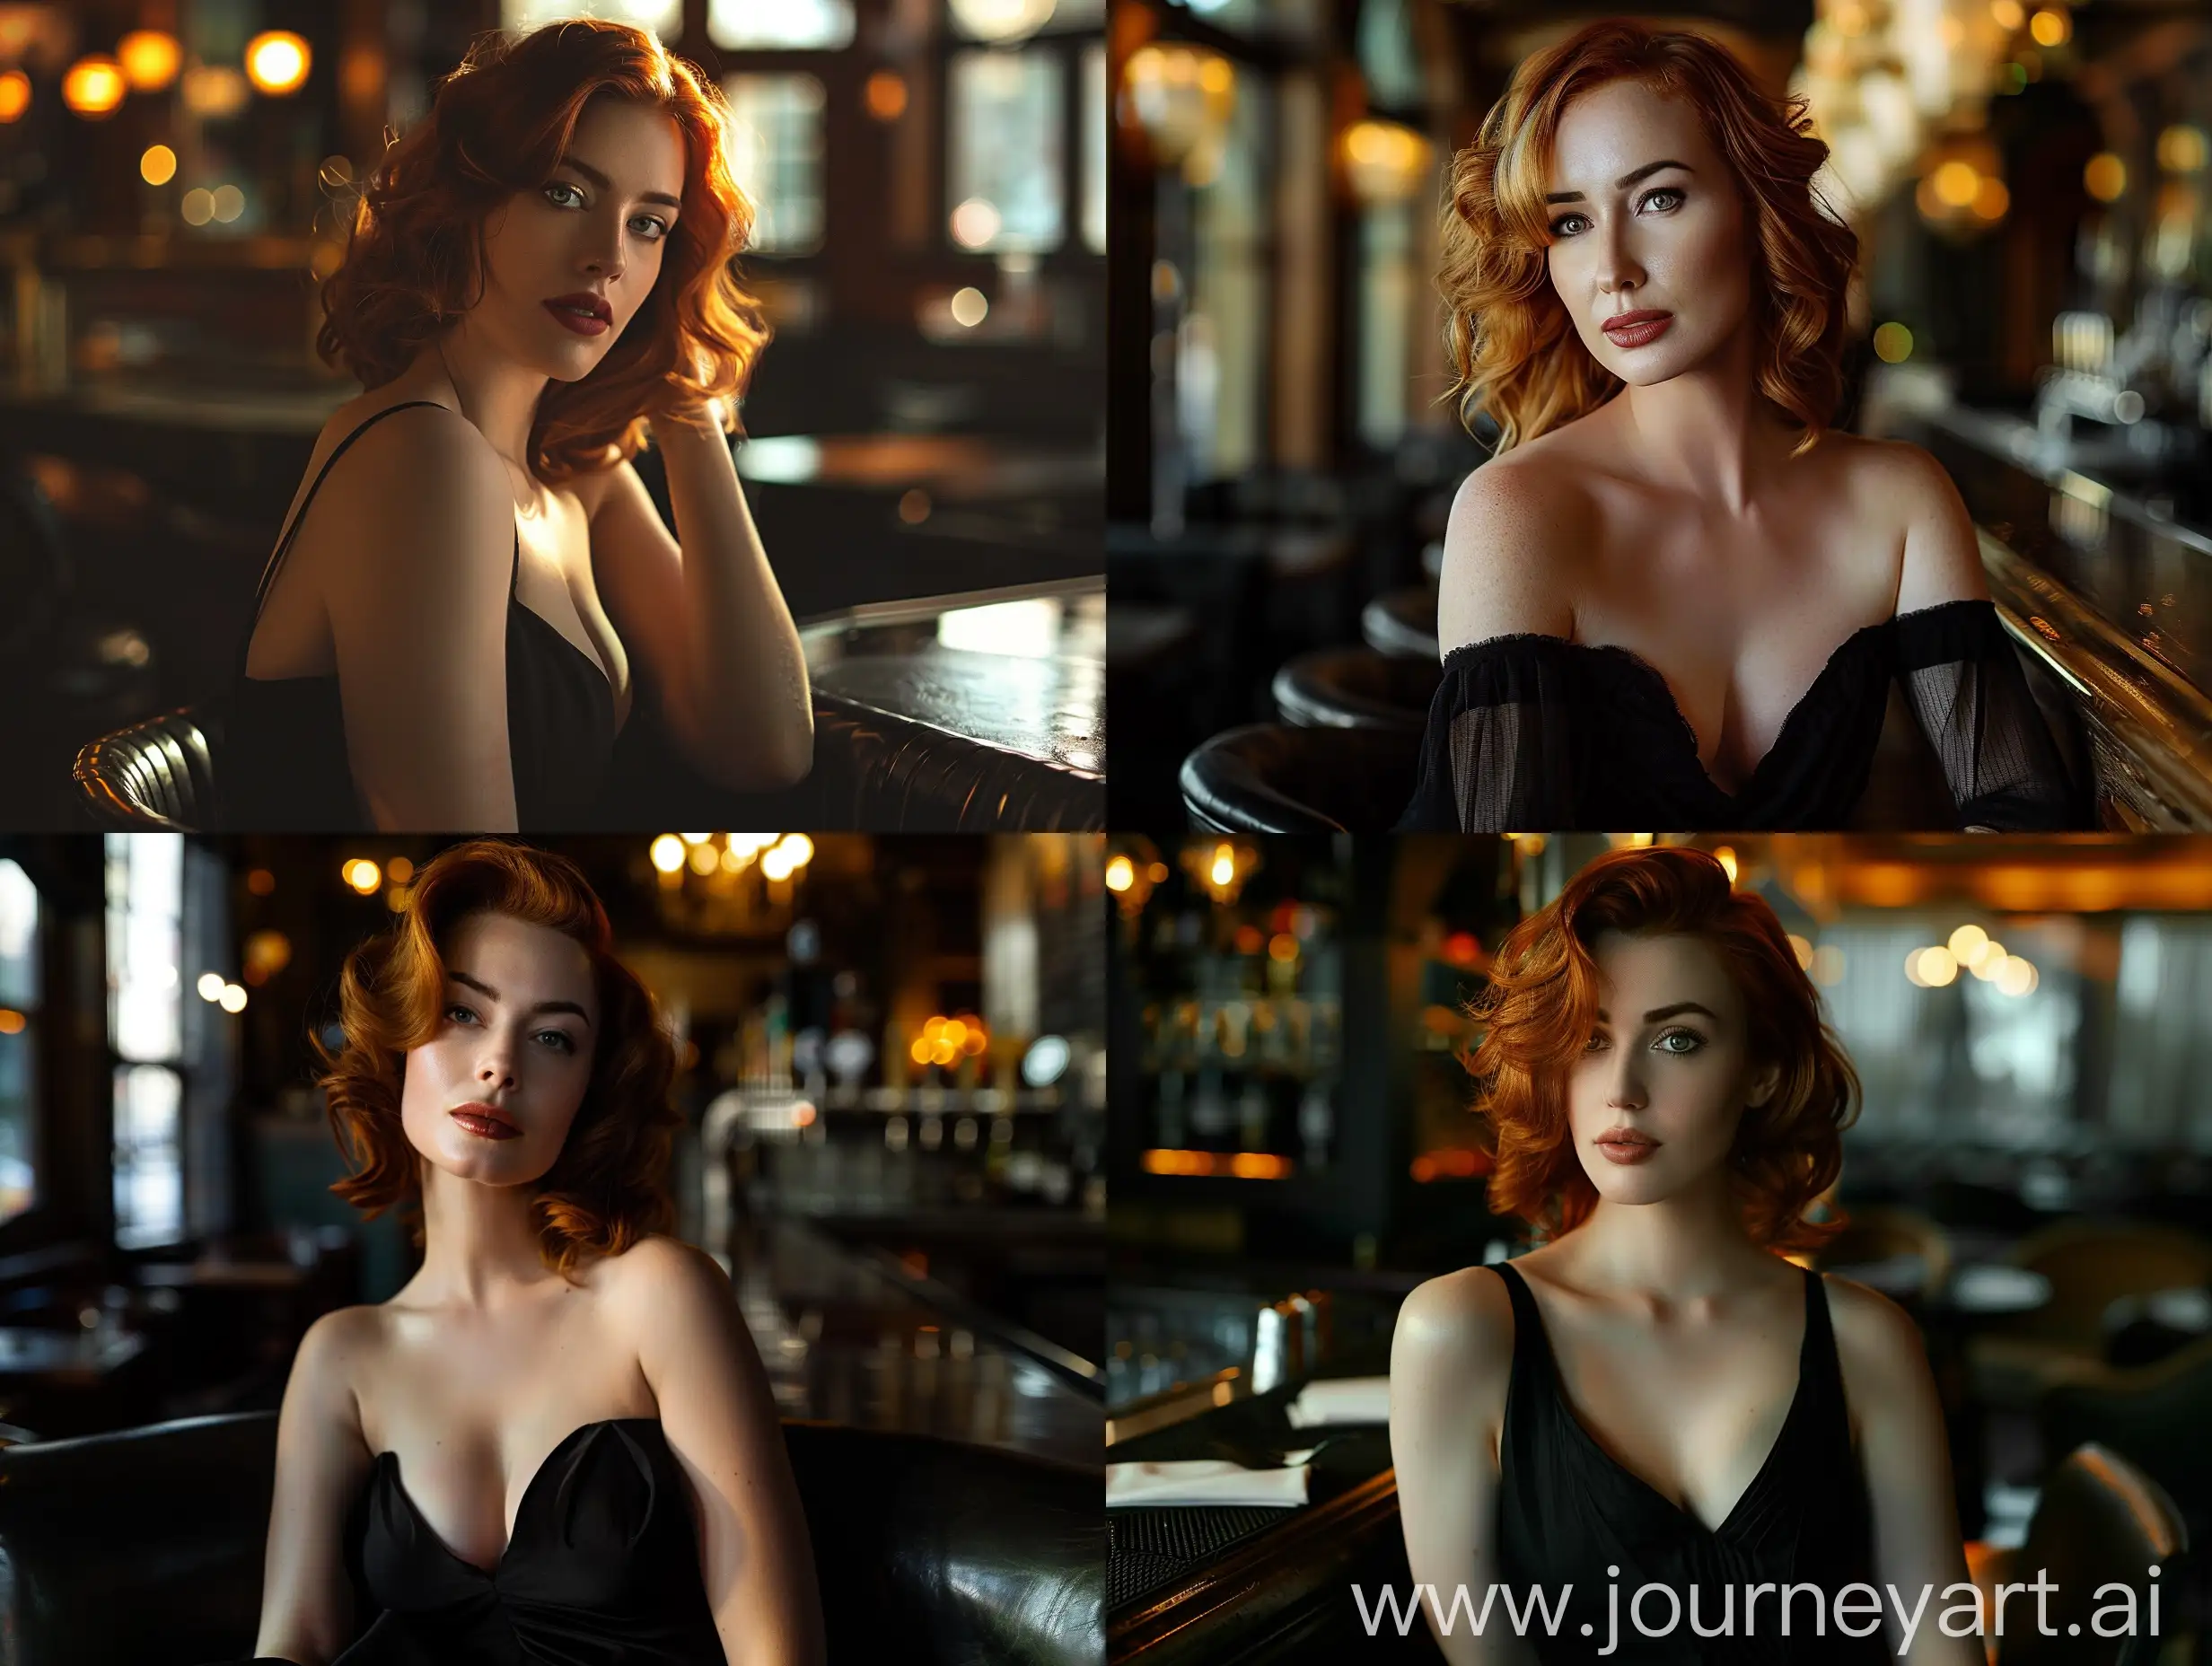 RedHaired-Woman-in-Cinematic-Noir-Ambiance-at-Bar